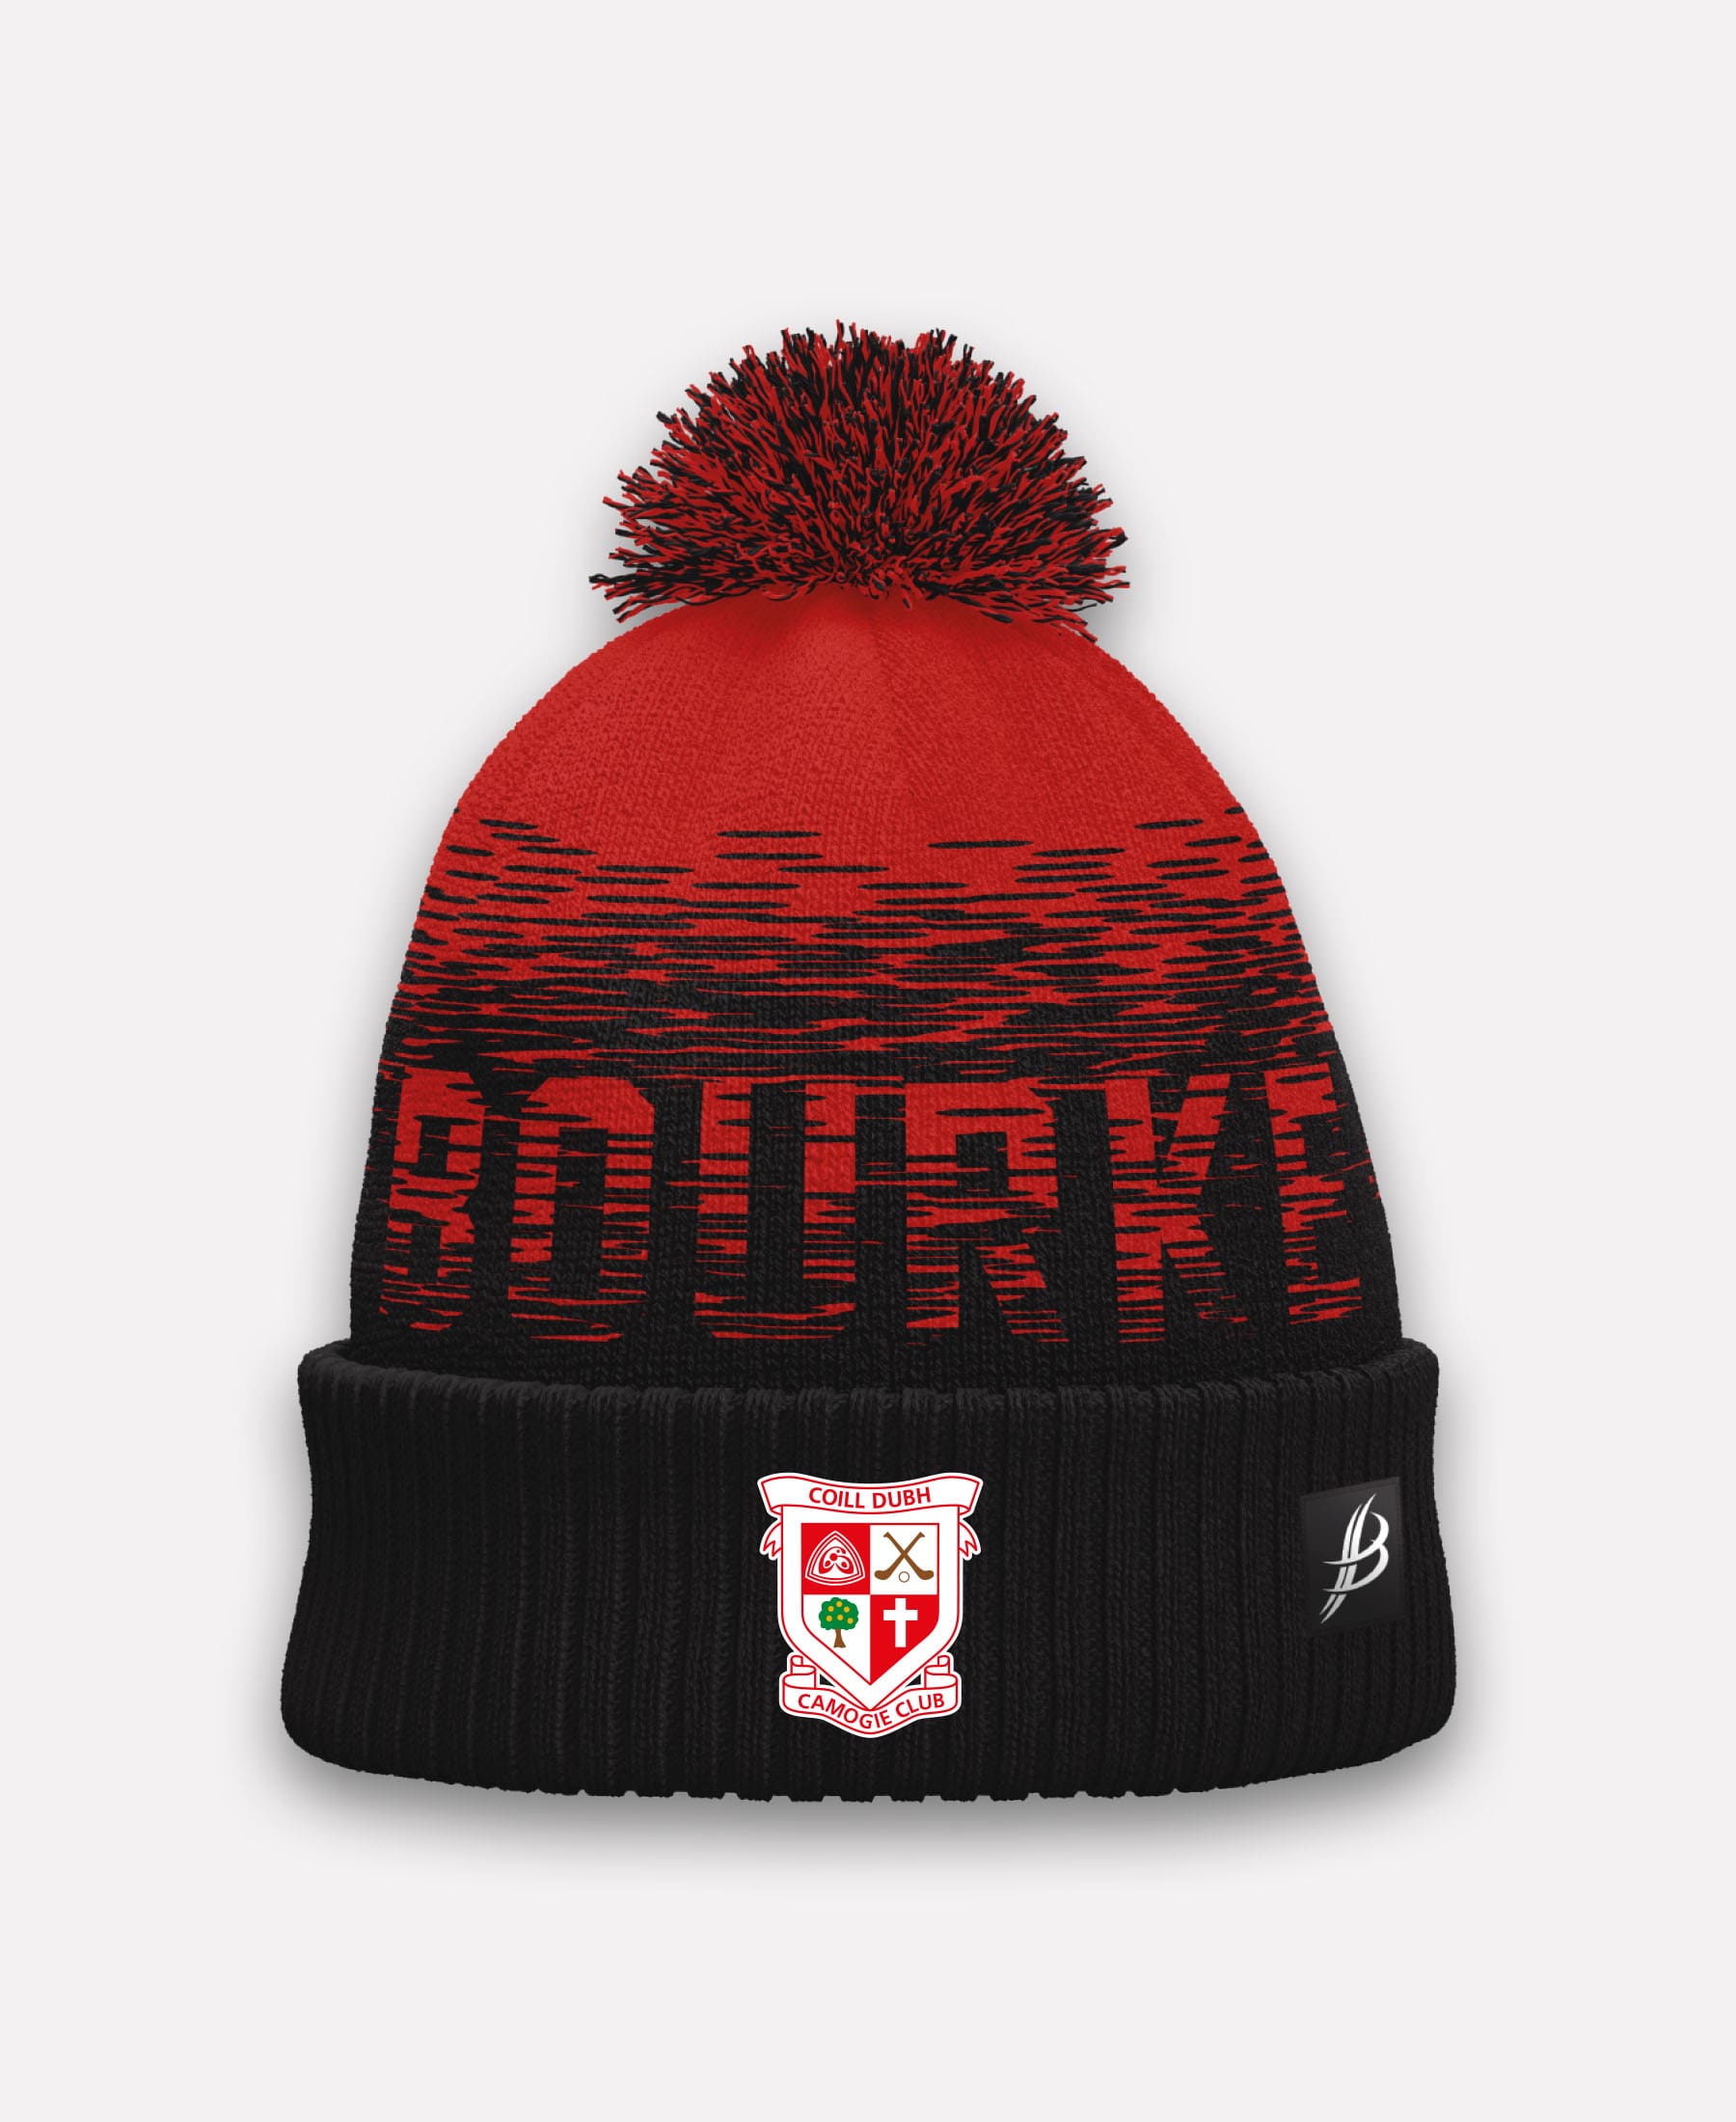 Coill Dubh Camogie TACA Bobble Hat (Red/Black)